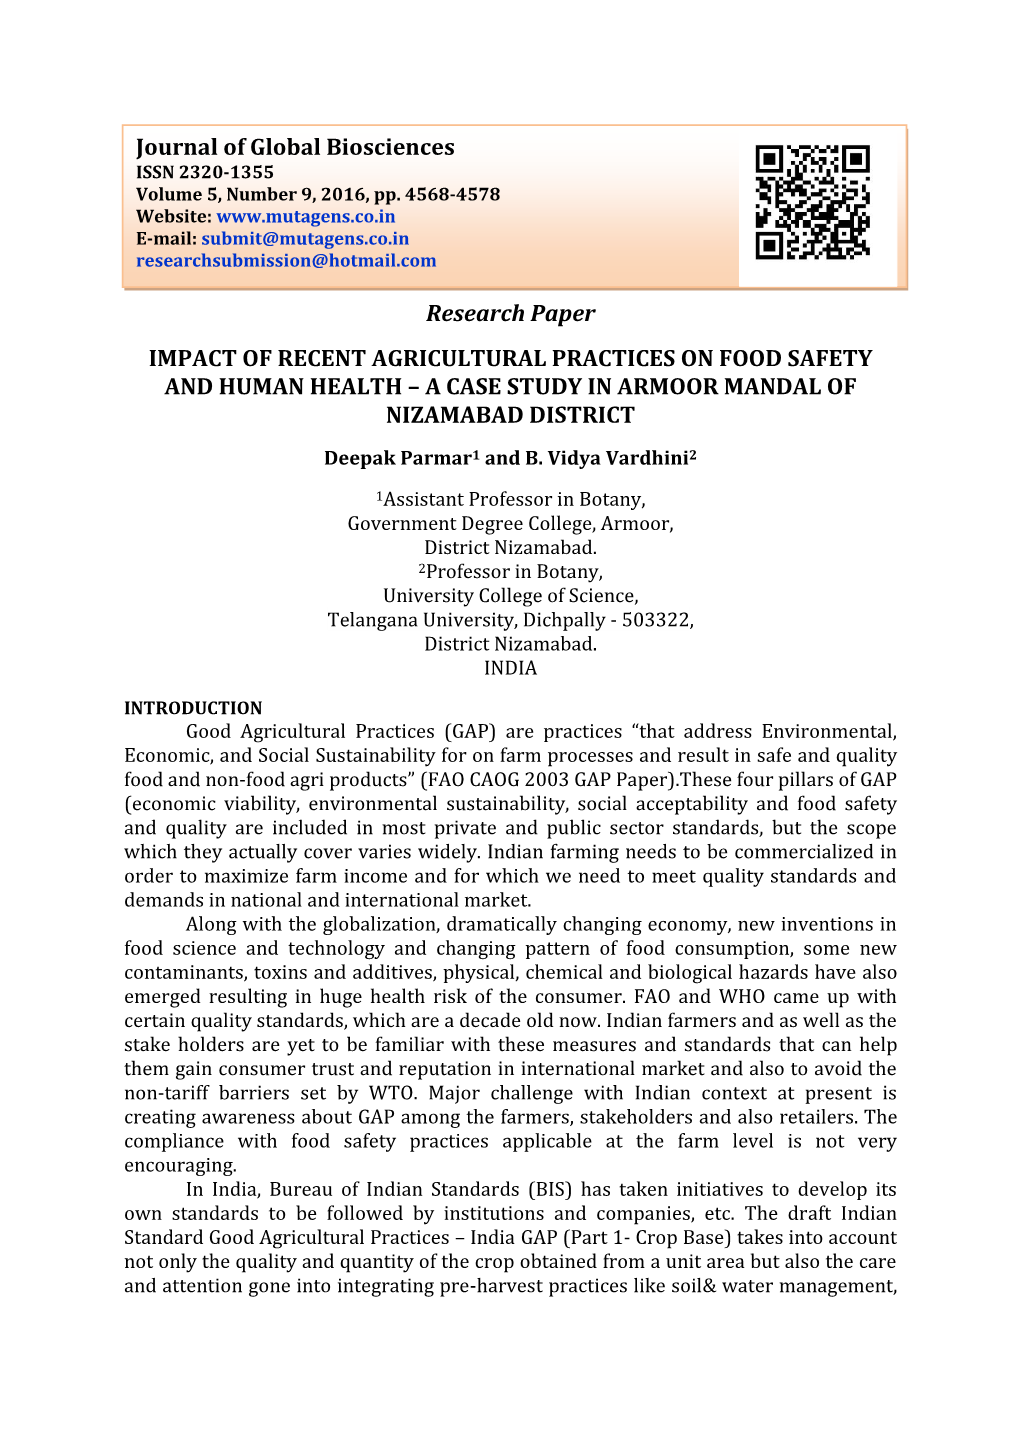 Research Paper IMPACT of RECENT AGRICULTURAL PRACTICES on FOOD SAFETY and HUMAN HEALTH – a CASE STUDY in ARMOOR MANDAL of NIZAMABAD DISTRICT Deepak Parmar1 and B